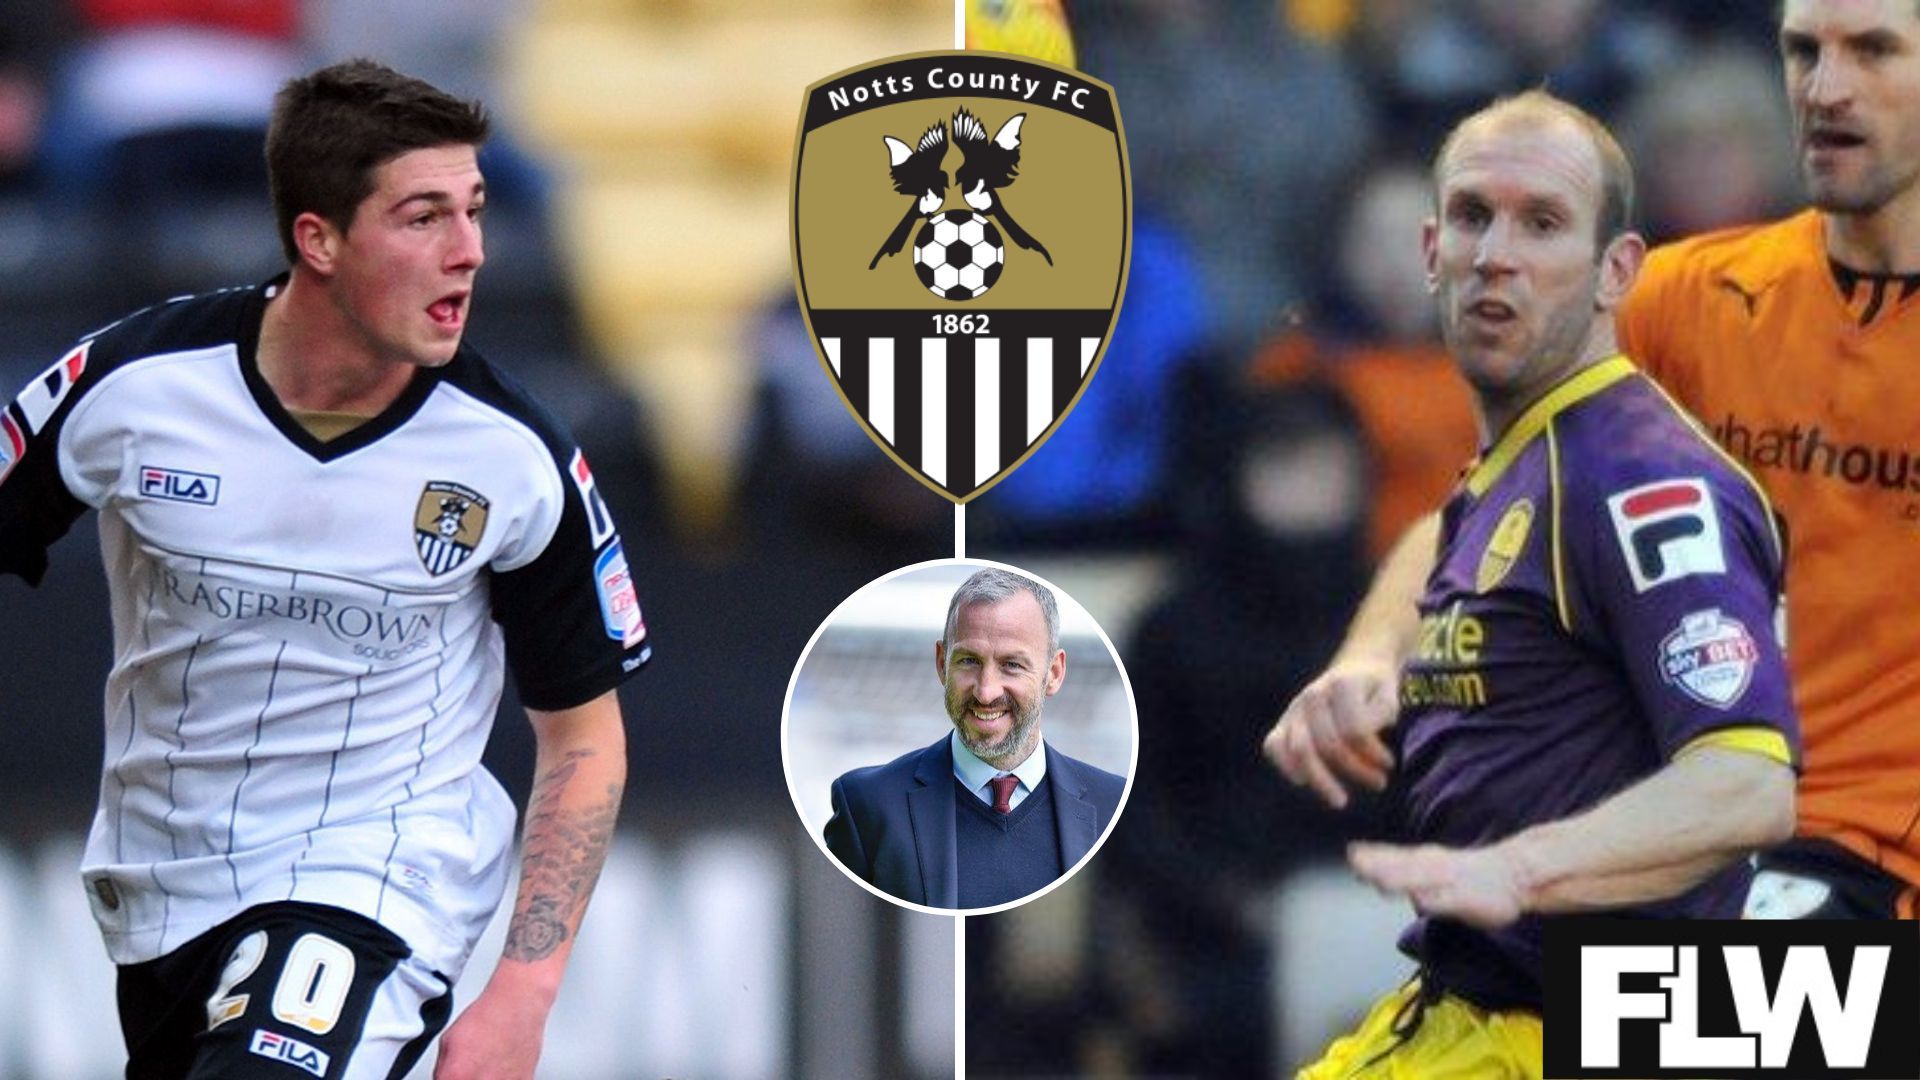 Shaun Derry's first 5 signings as Notts County manager - Where are they now?